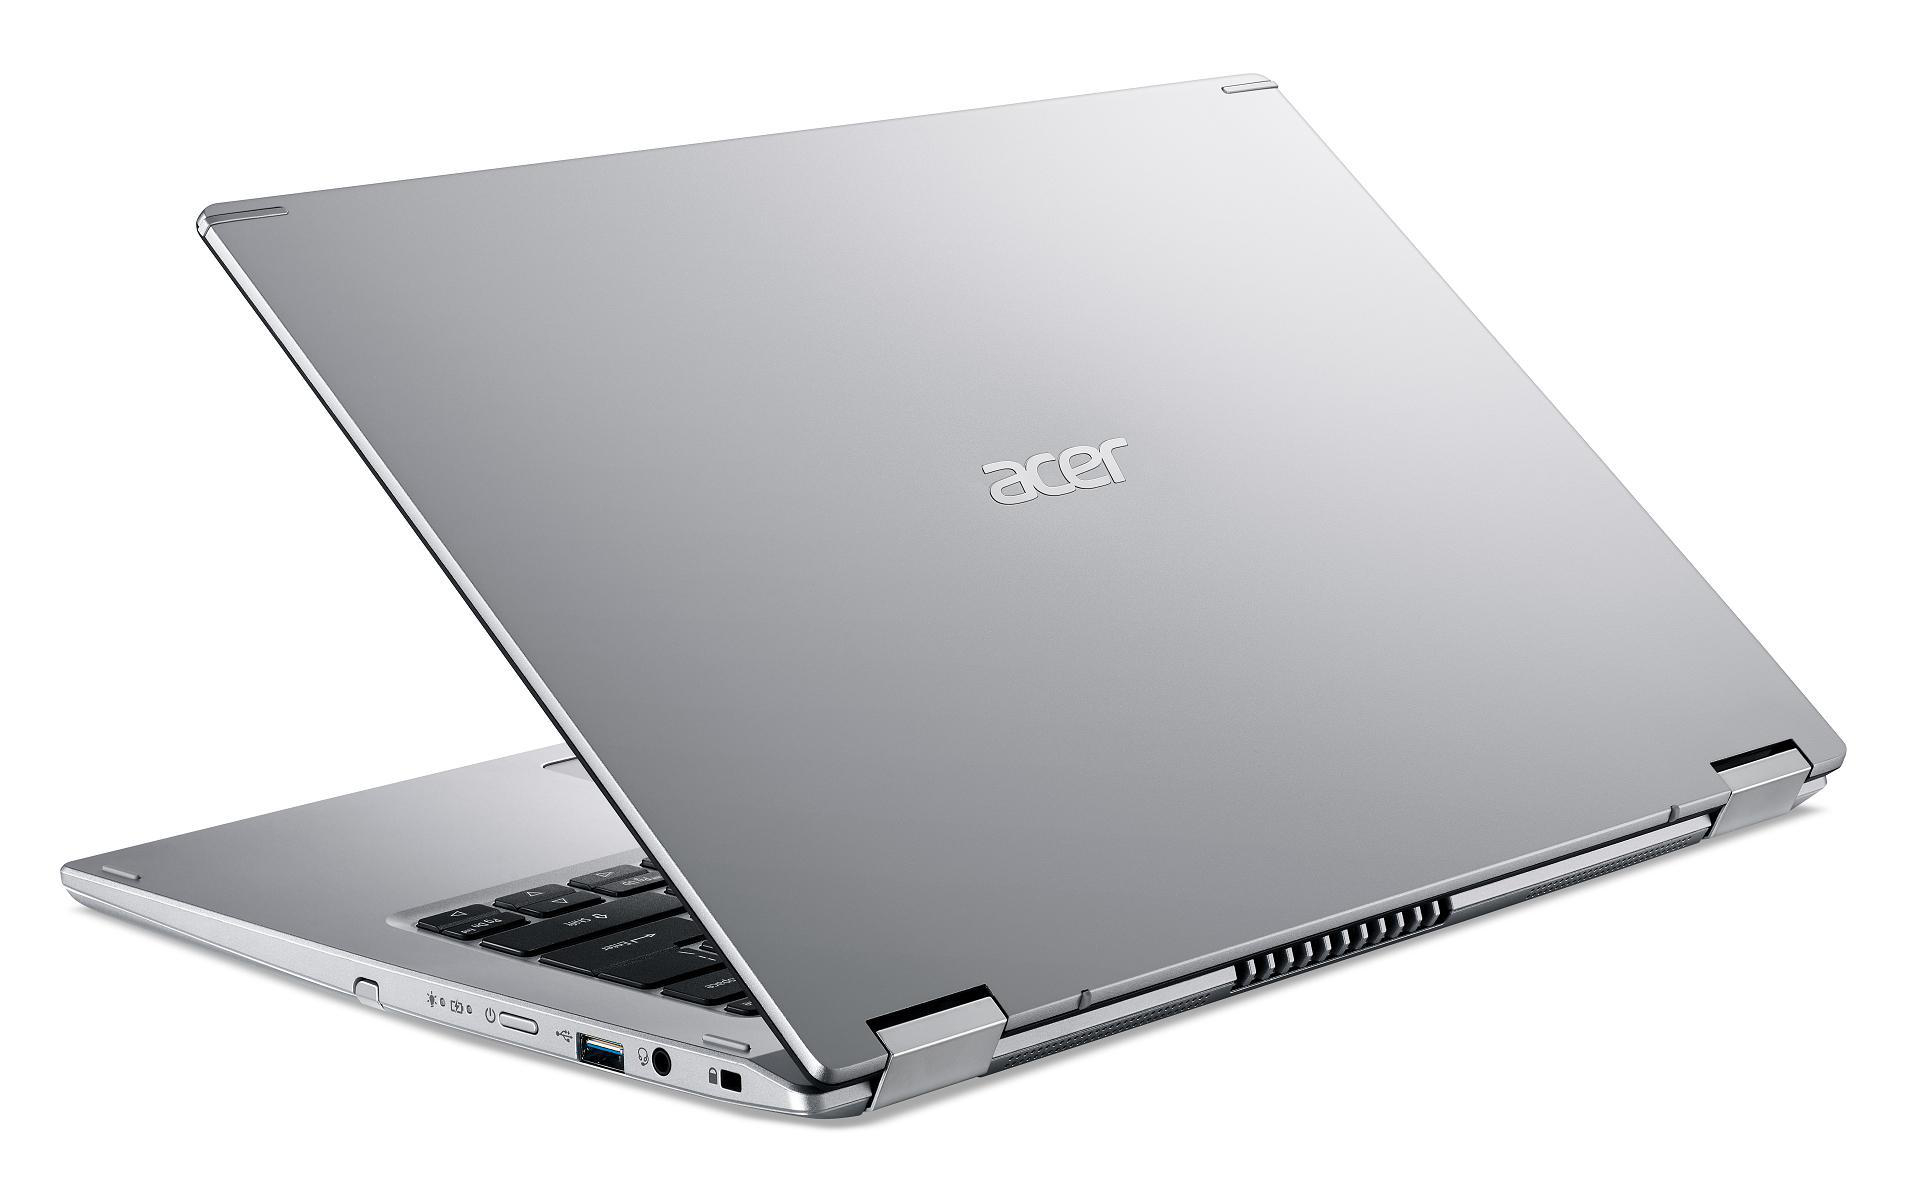 Prozessor, Zoll (64 GB Bit) Home RAM, mit Radeon™ 128 (SP314-21N-R686), Spin 10 Notebook, GB Acer Silver Windows SSD, Onboard ACER 14 AMD AMD, S-Modus Touchscreen, Athlon™ 3 Graphics, 4 Silber Display